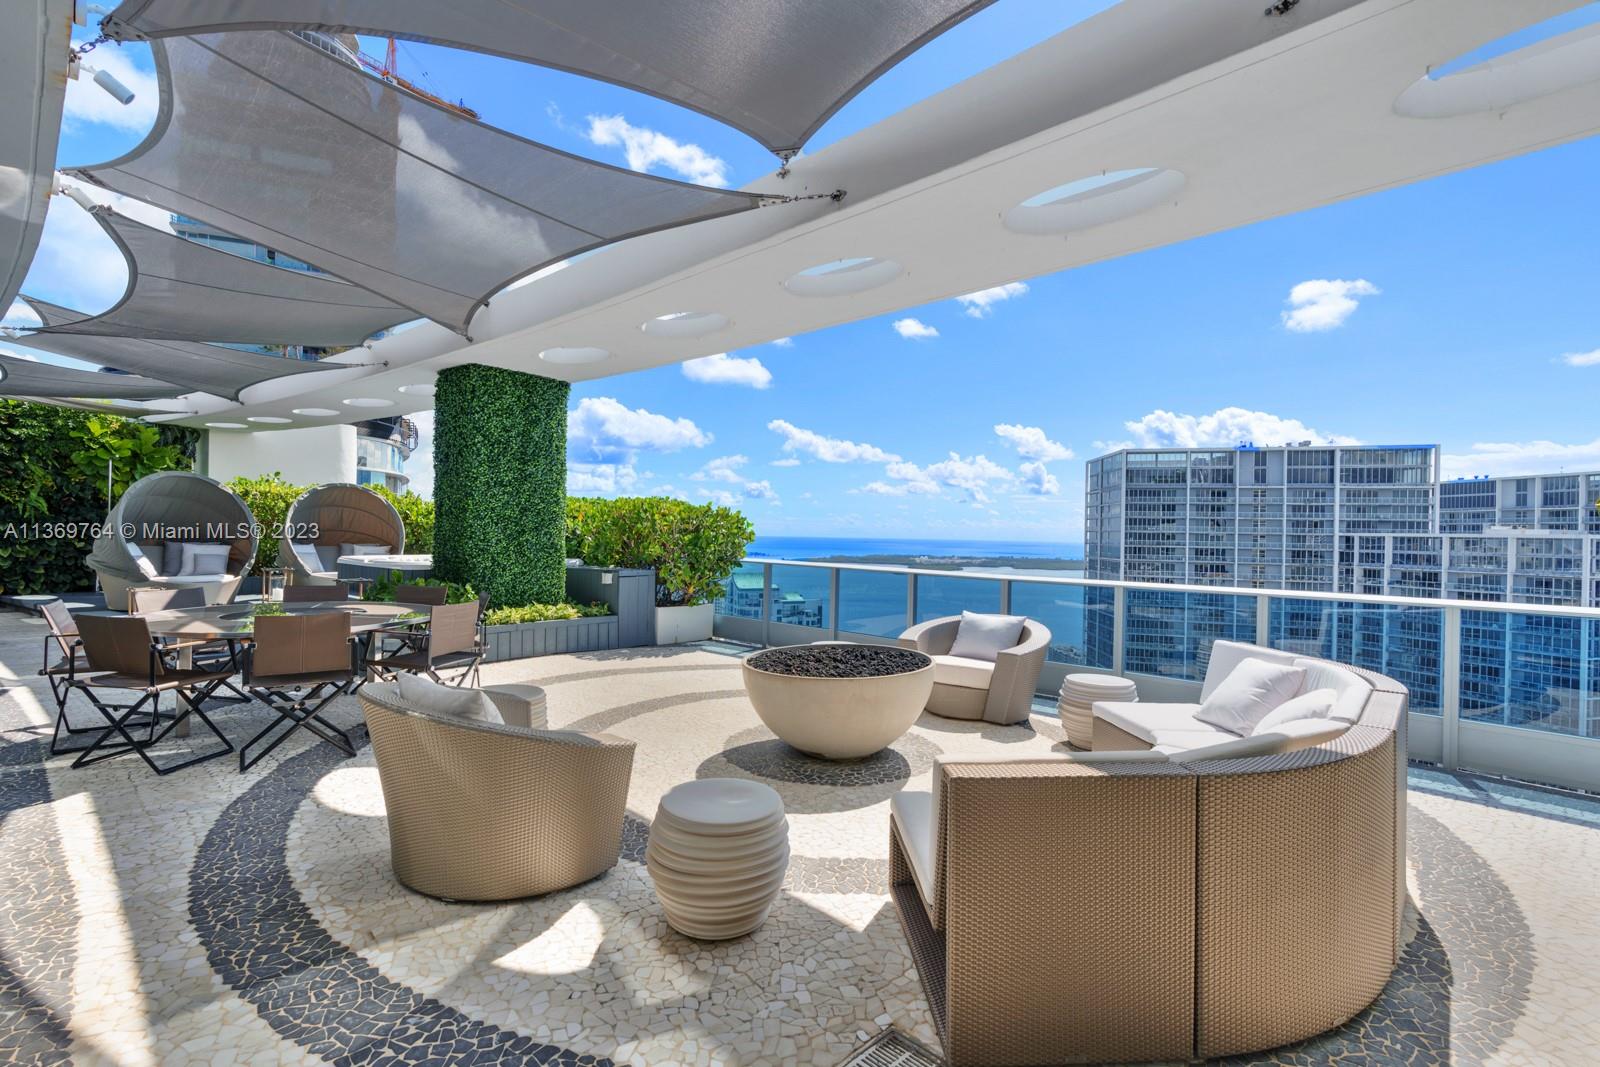 Located on the 54th floor of the Epic Residences in Downtown Miami, this completely custom 2-story Penthouse offers breathtaking South East views of the bay and Brickell’s city skyline from an expansive deep balcony with 4 bedrooms, 5 full and 1 half bath. The open floor plan flows through with wide views from the Kitchen with cooking island, Miele and Subzero appliances, and pantry. Split floor plan offers ultimate privacy for the one of a kind Master Suite with sitting area. Indulge in easy entertaining from the 2nd floor dining room / media room, gym and oversized terrace with hot tub and summer kitchen. Top of the line finishes throughout including wooden floors, electrical blackout shades and built-out closets. 2 assigned garage spaces included.